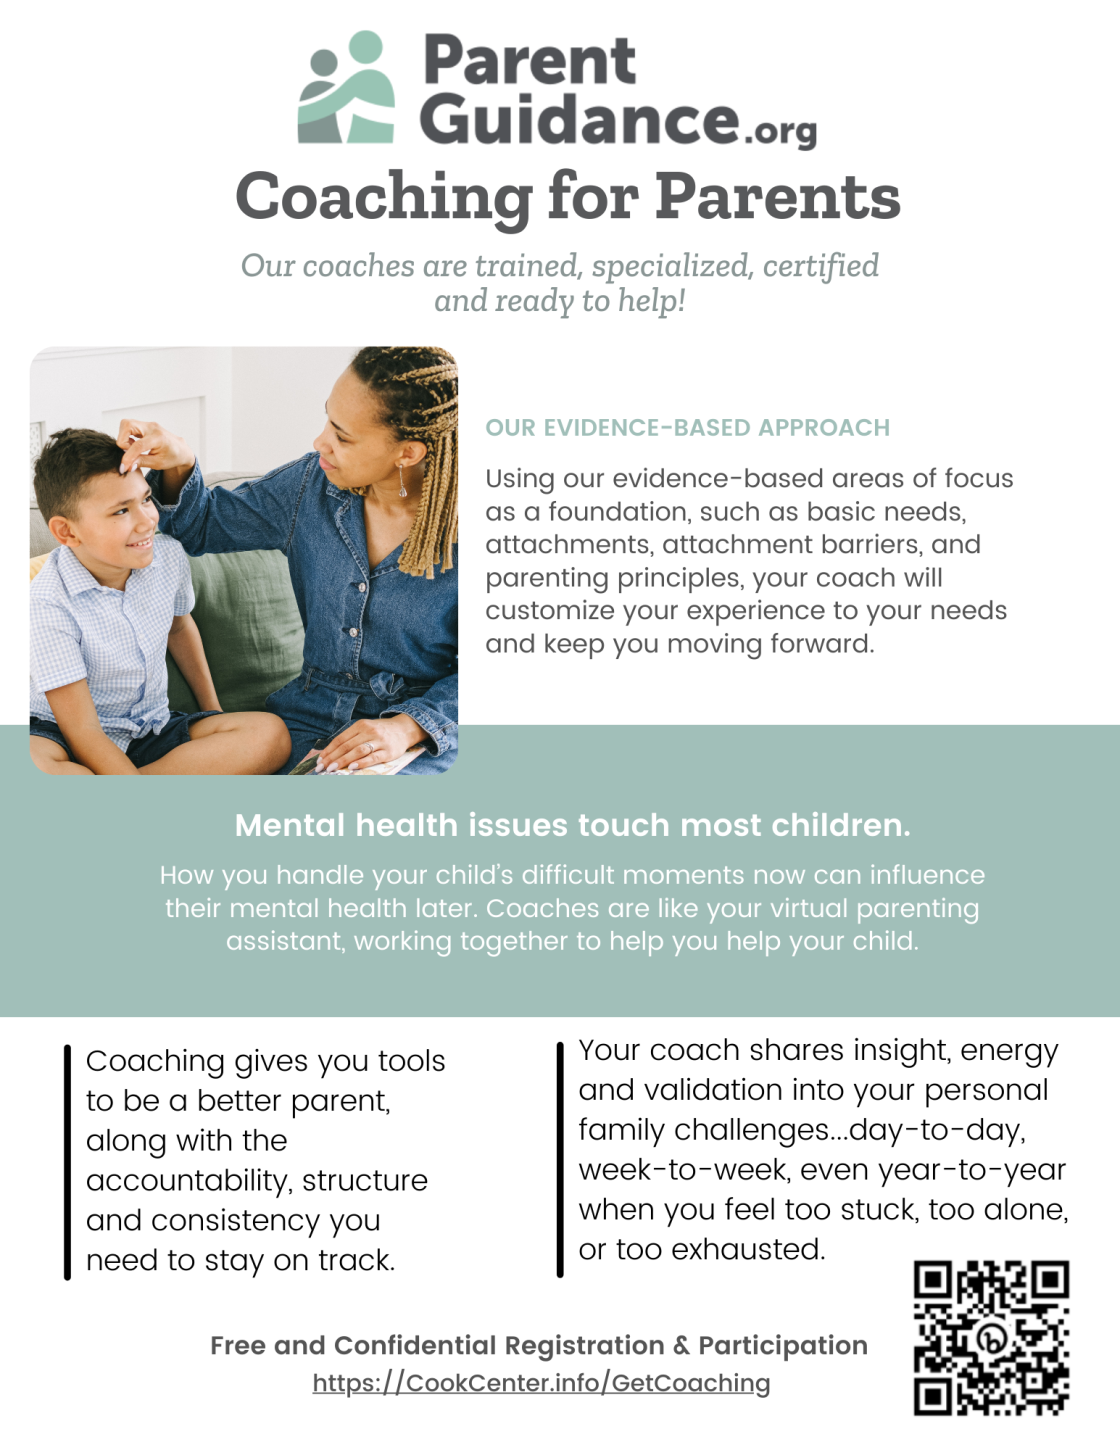 Learn More About Coaching